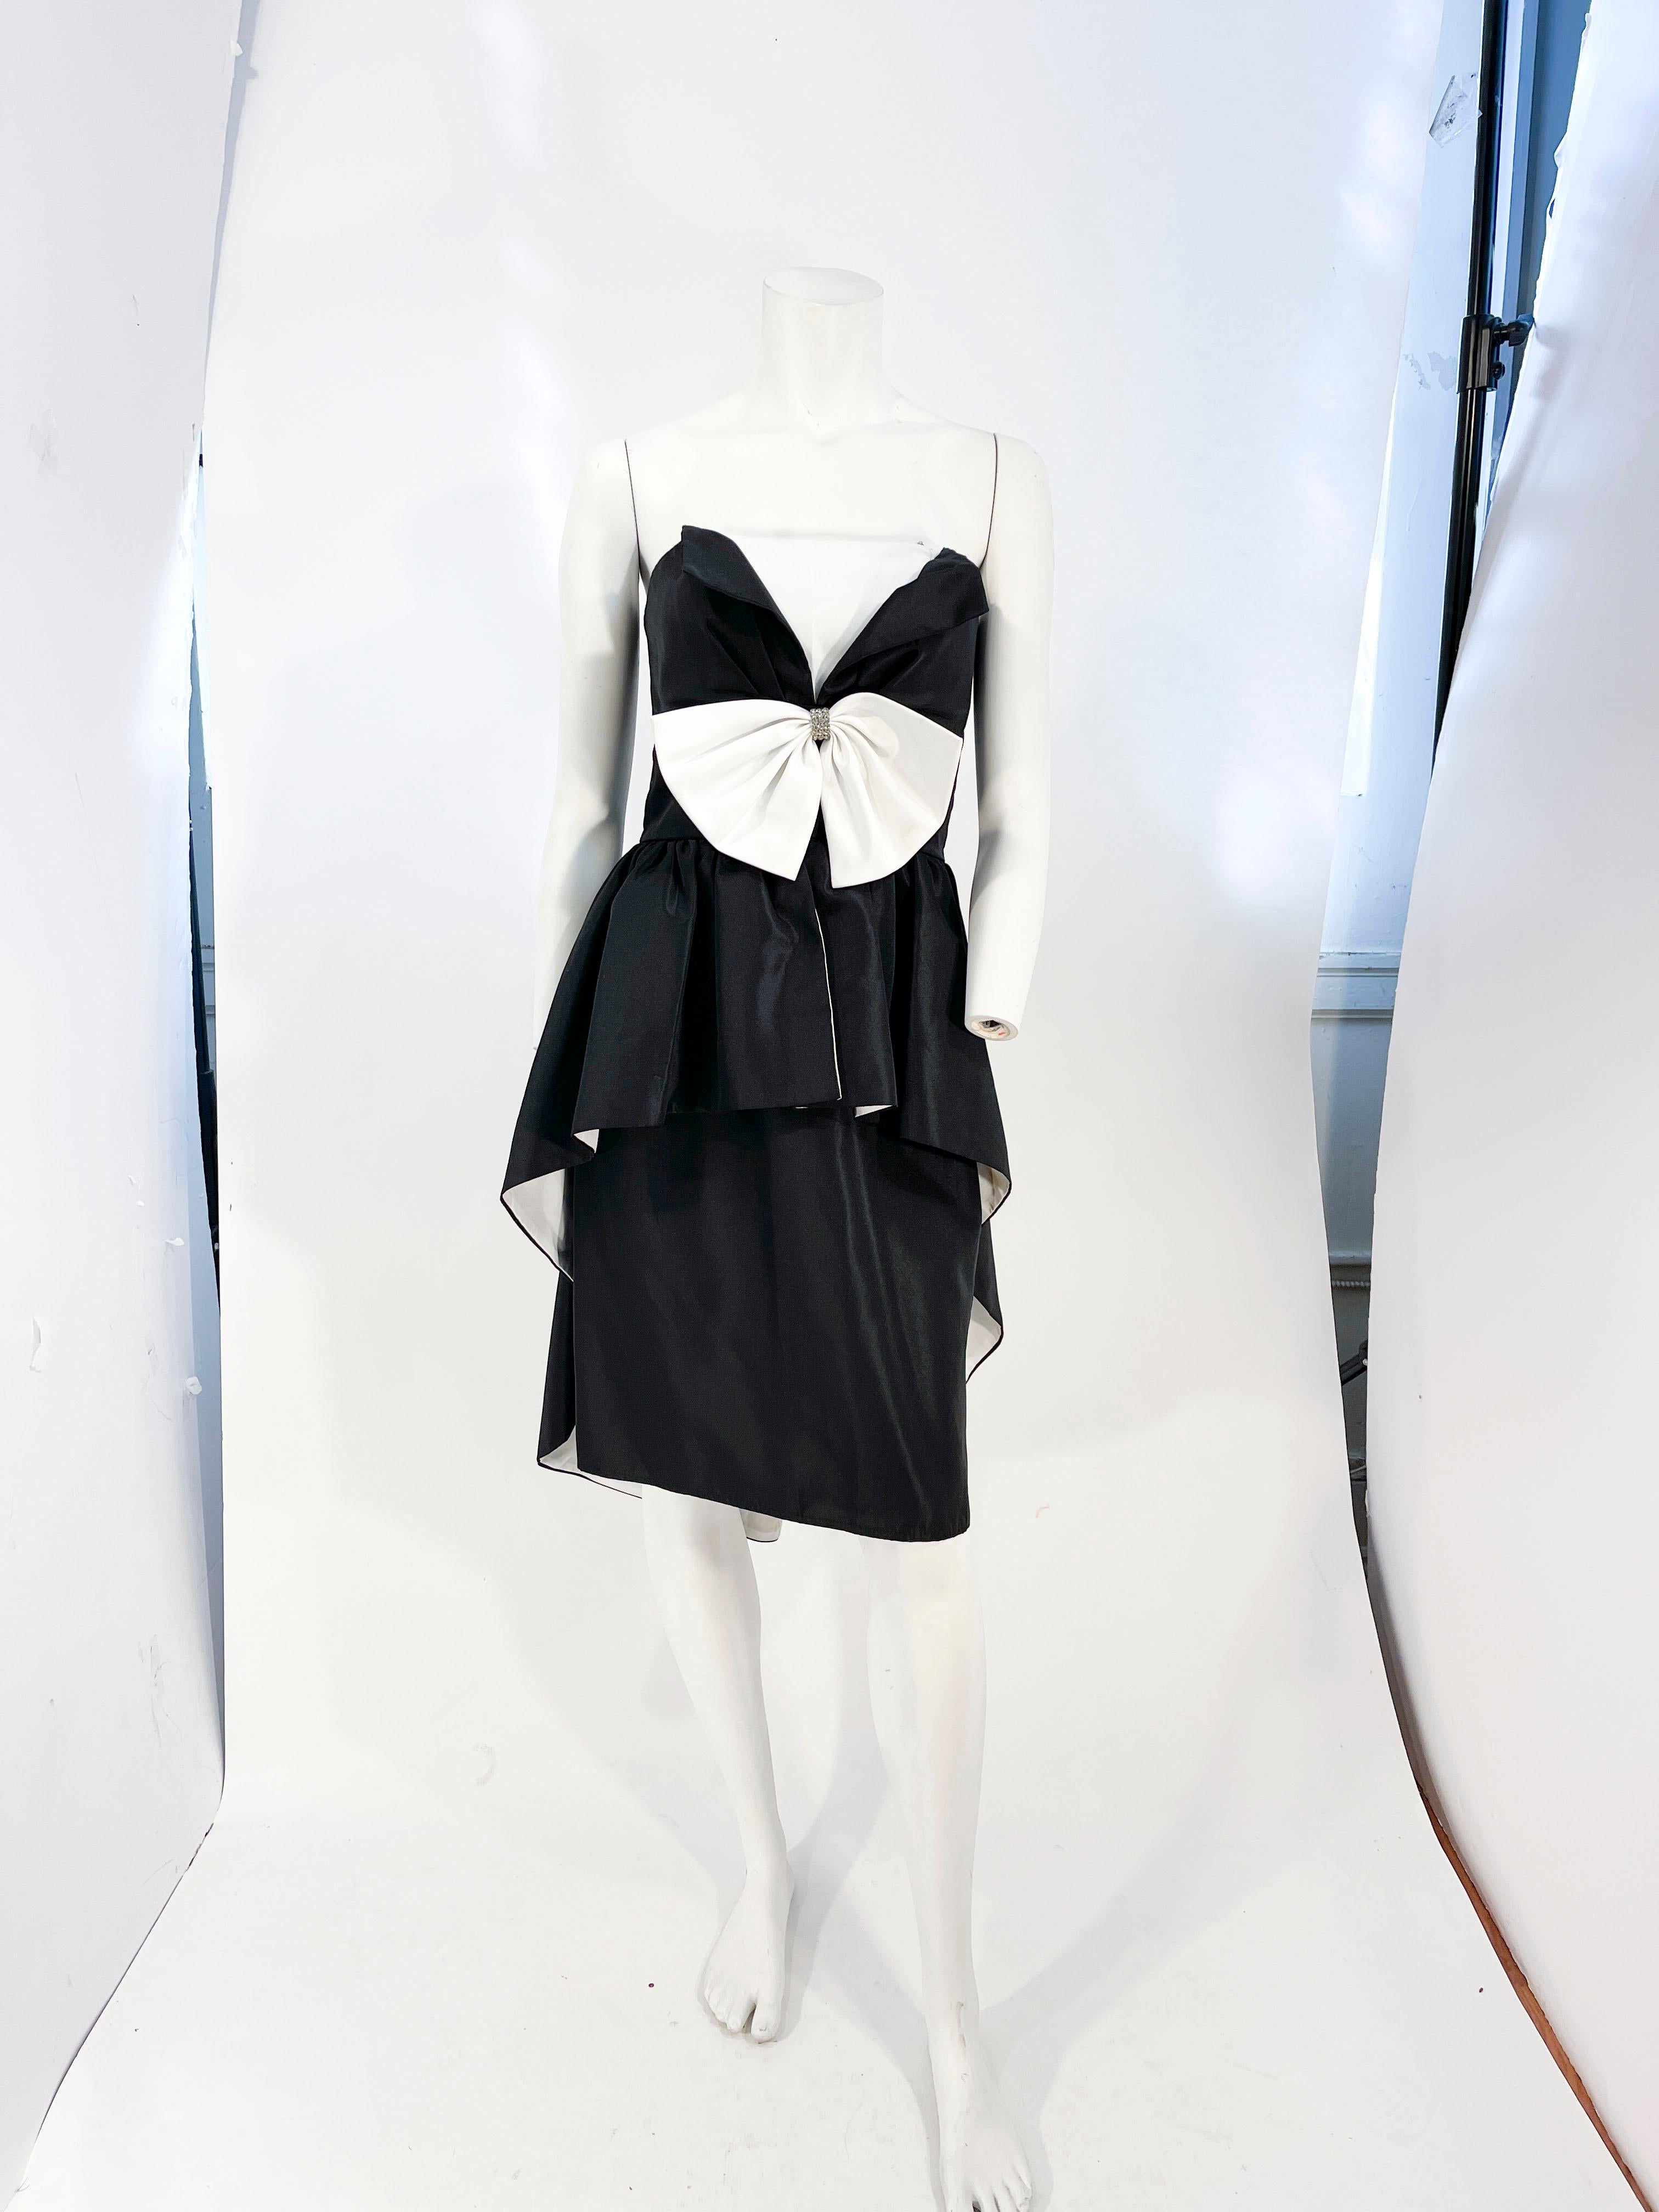 1980s Huey Waltzer for Darcy black and white cocktail dress featuring a fitted and layered bodice with black panels layered over the white bust line. Along the double bust line is an enlarged centered bow finished with a band of rhinestones. 

The